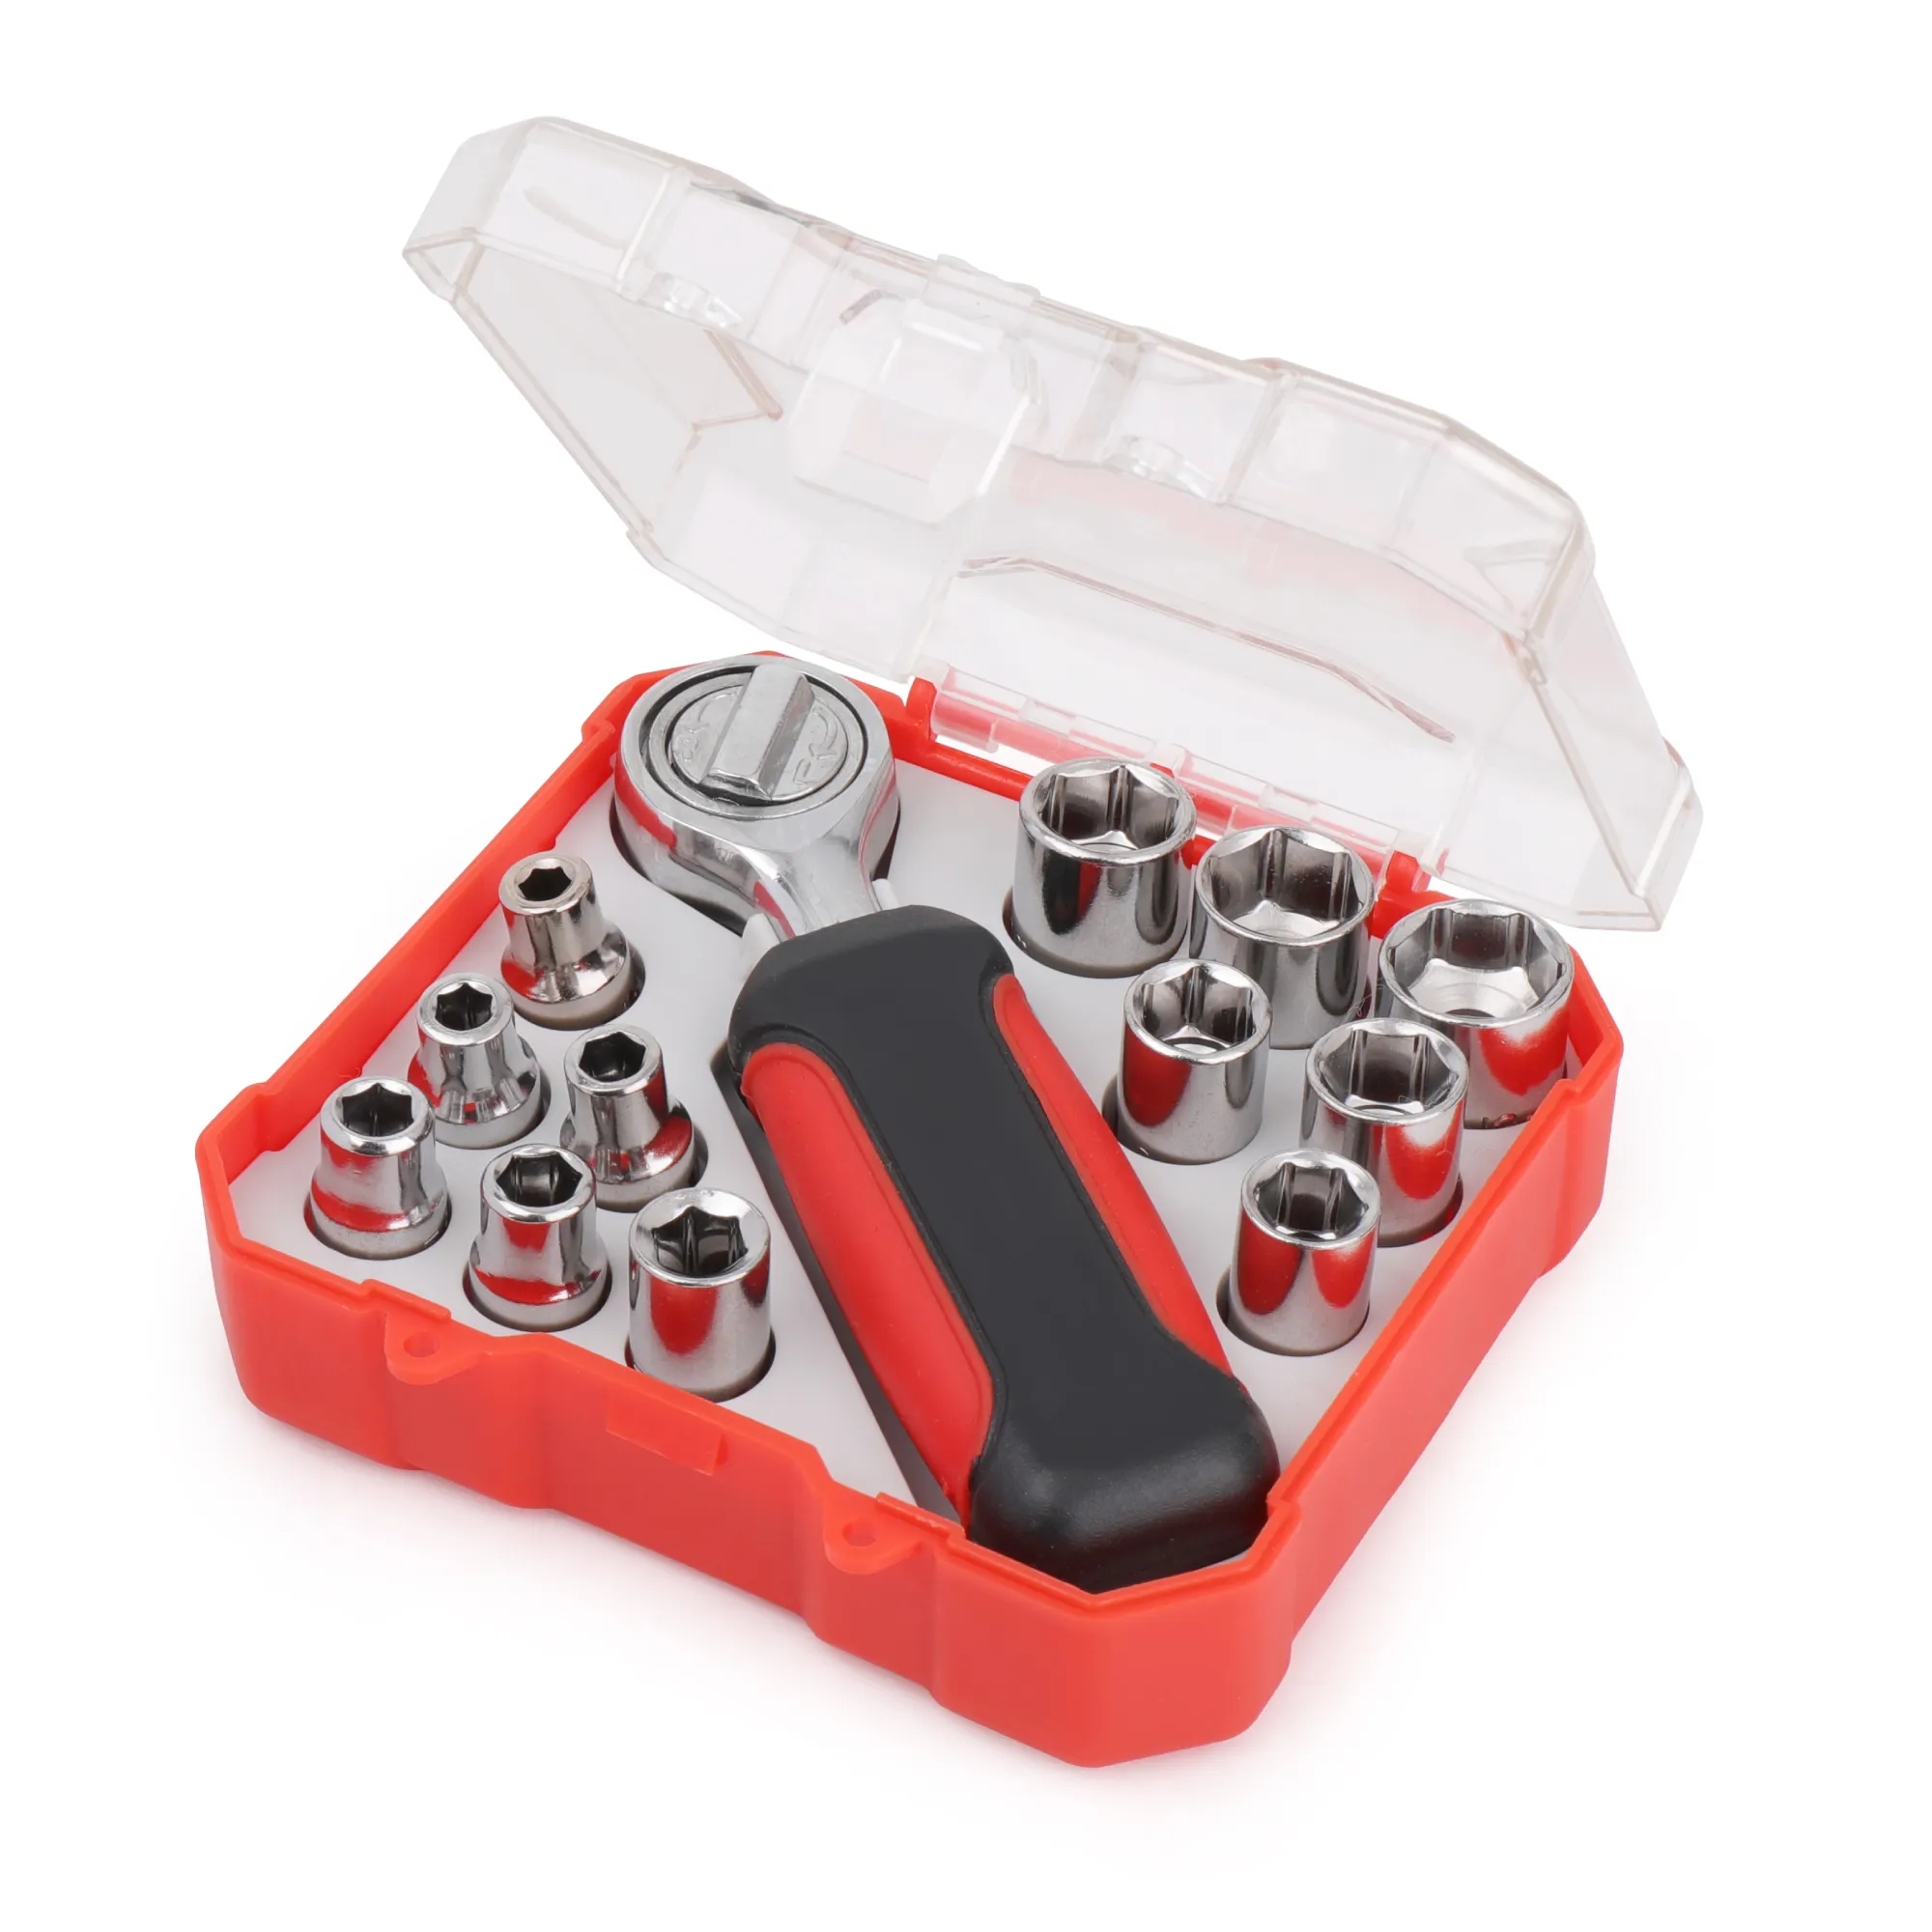 13pc Compact 1/4 inch Metric Socket Set including Ratchet Wrench Handle in a Portable Tray Box Case. OEM ODM Supported